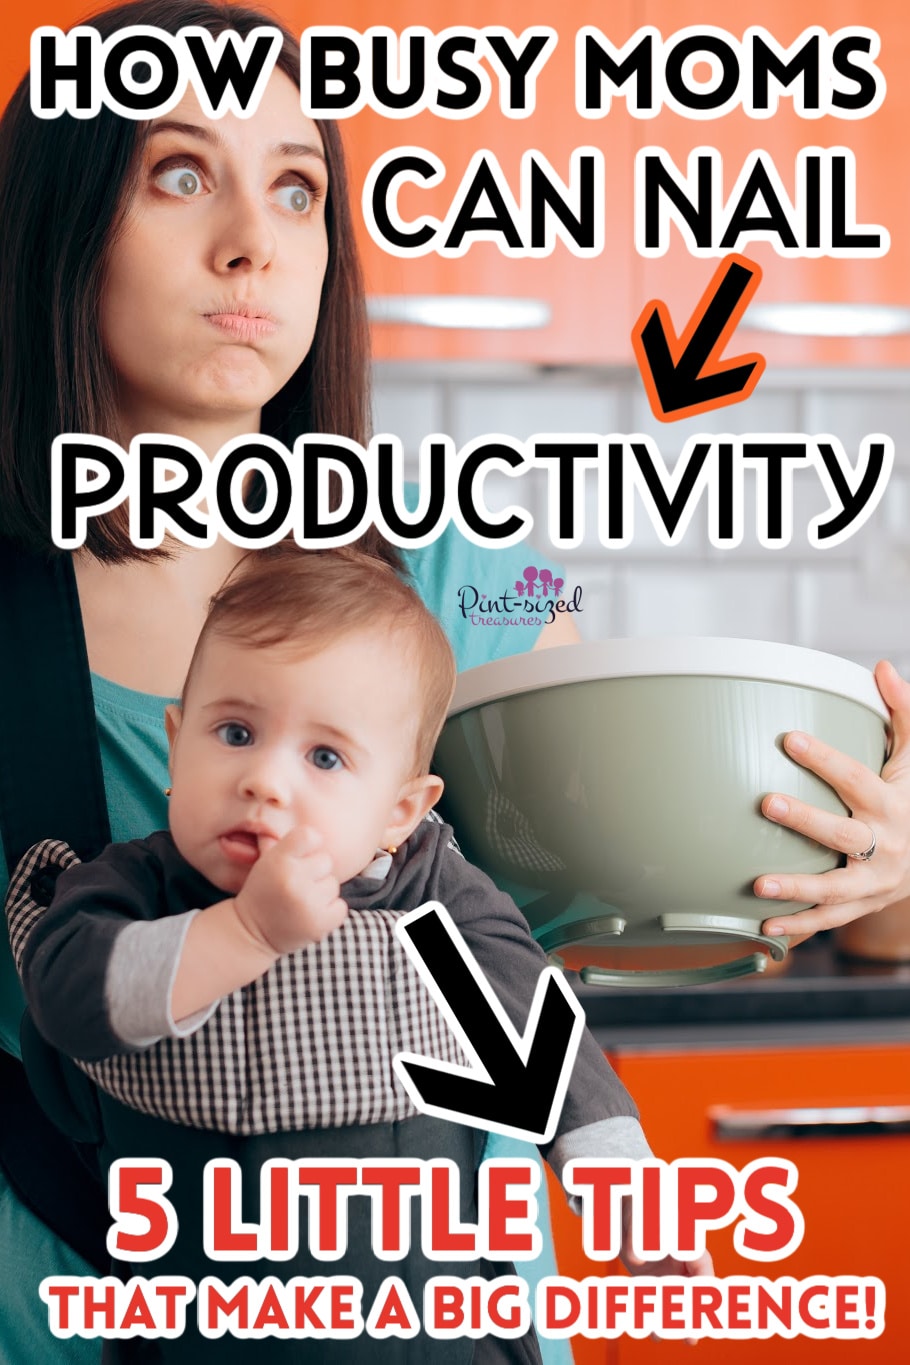 a mom trying to be more productive at home